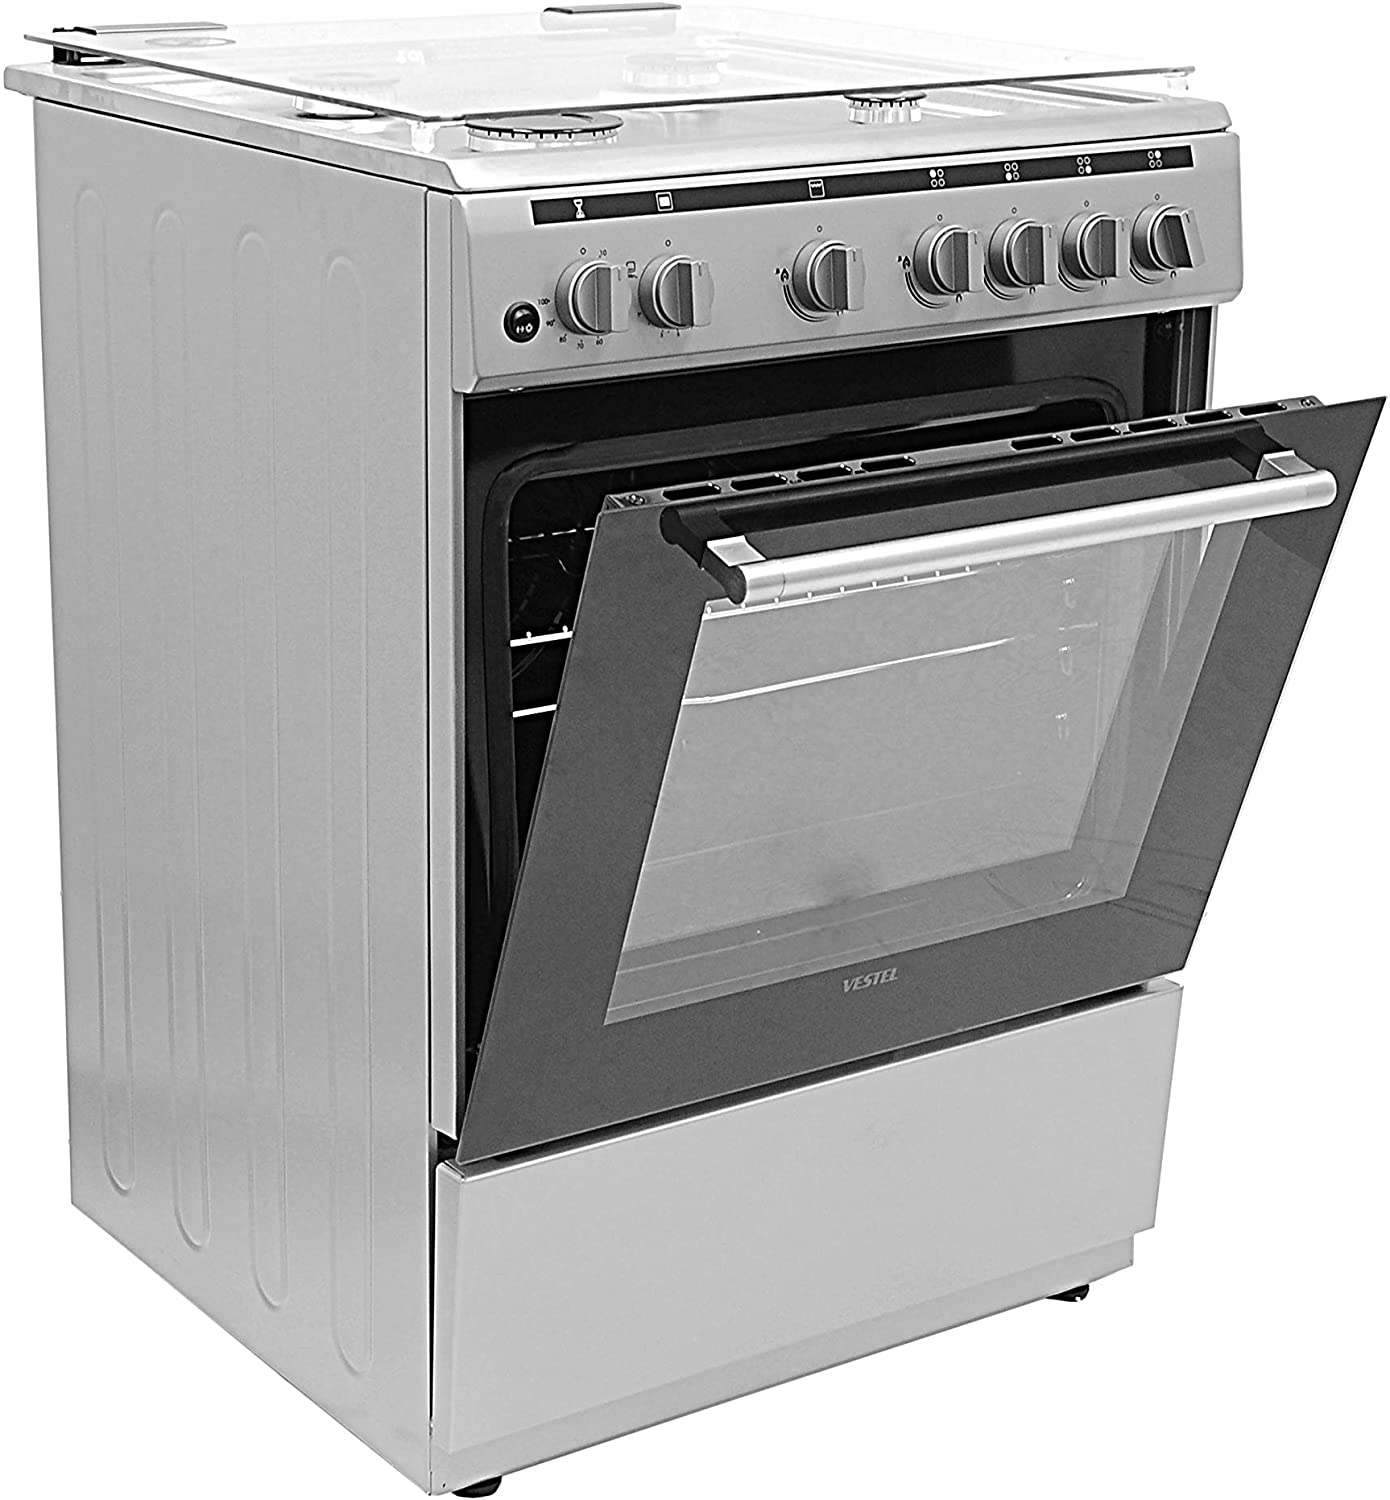 Vestel Freestanding Gas-Cooker 4-Burner Full-Safety, Stainless-Steel Cooker, Gas Oven with Rotisserie, Silver, 60 x 60 x 85 cm – F66G40X